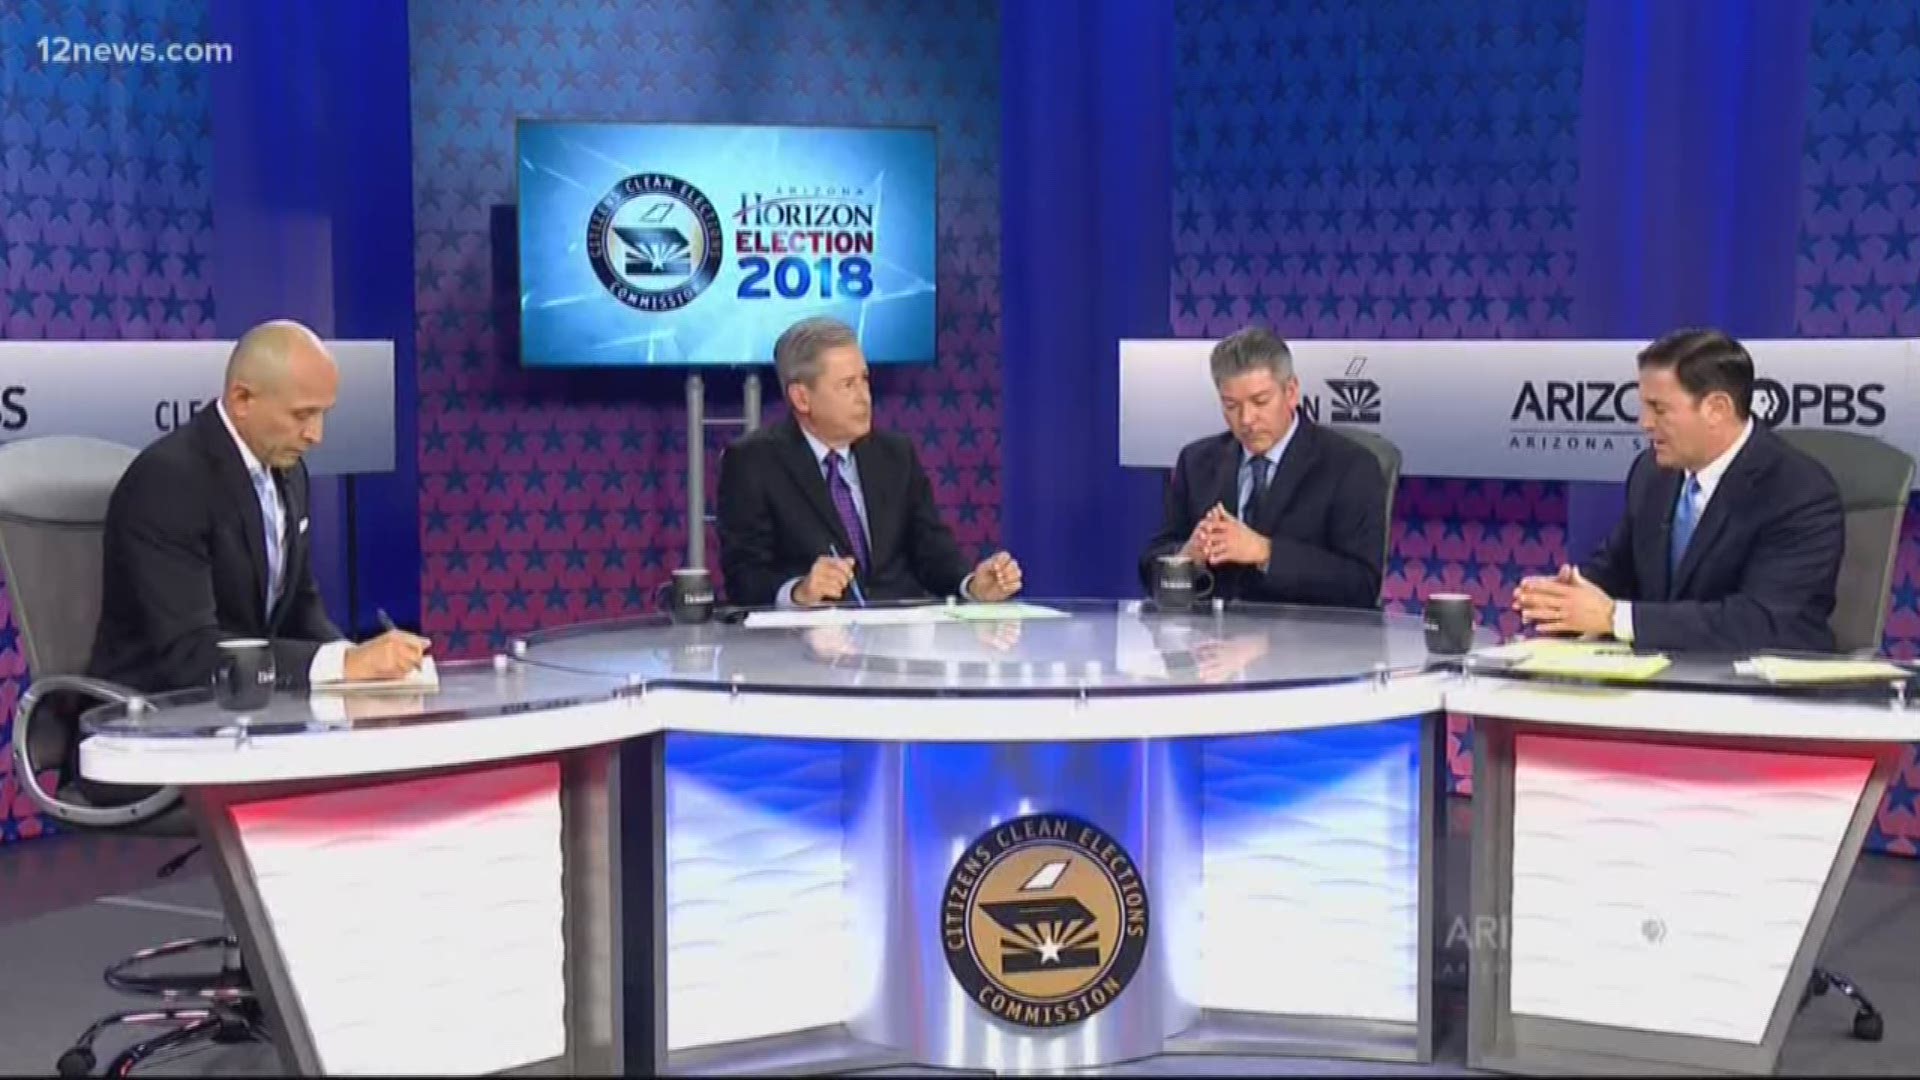 Three candidates want to be Arizona governor and tonight they squared off in a debate hosted by Arizona PBS. Much of the debate focused on the issue of education.